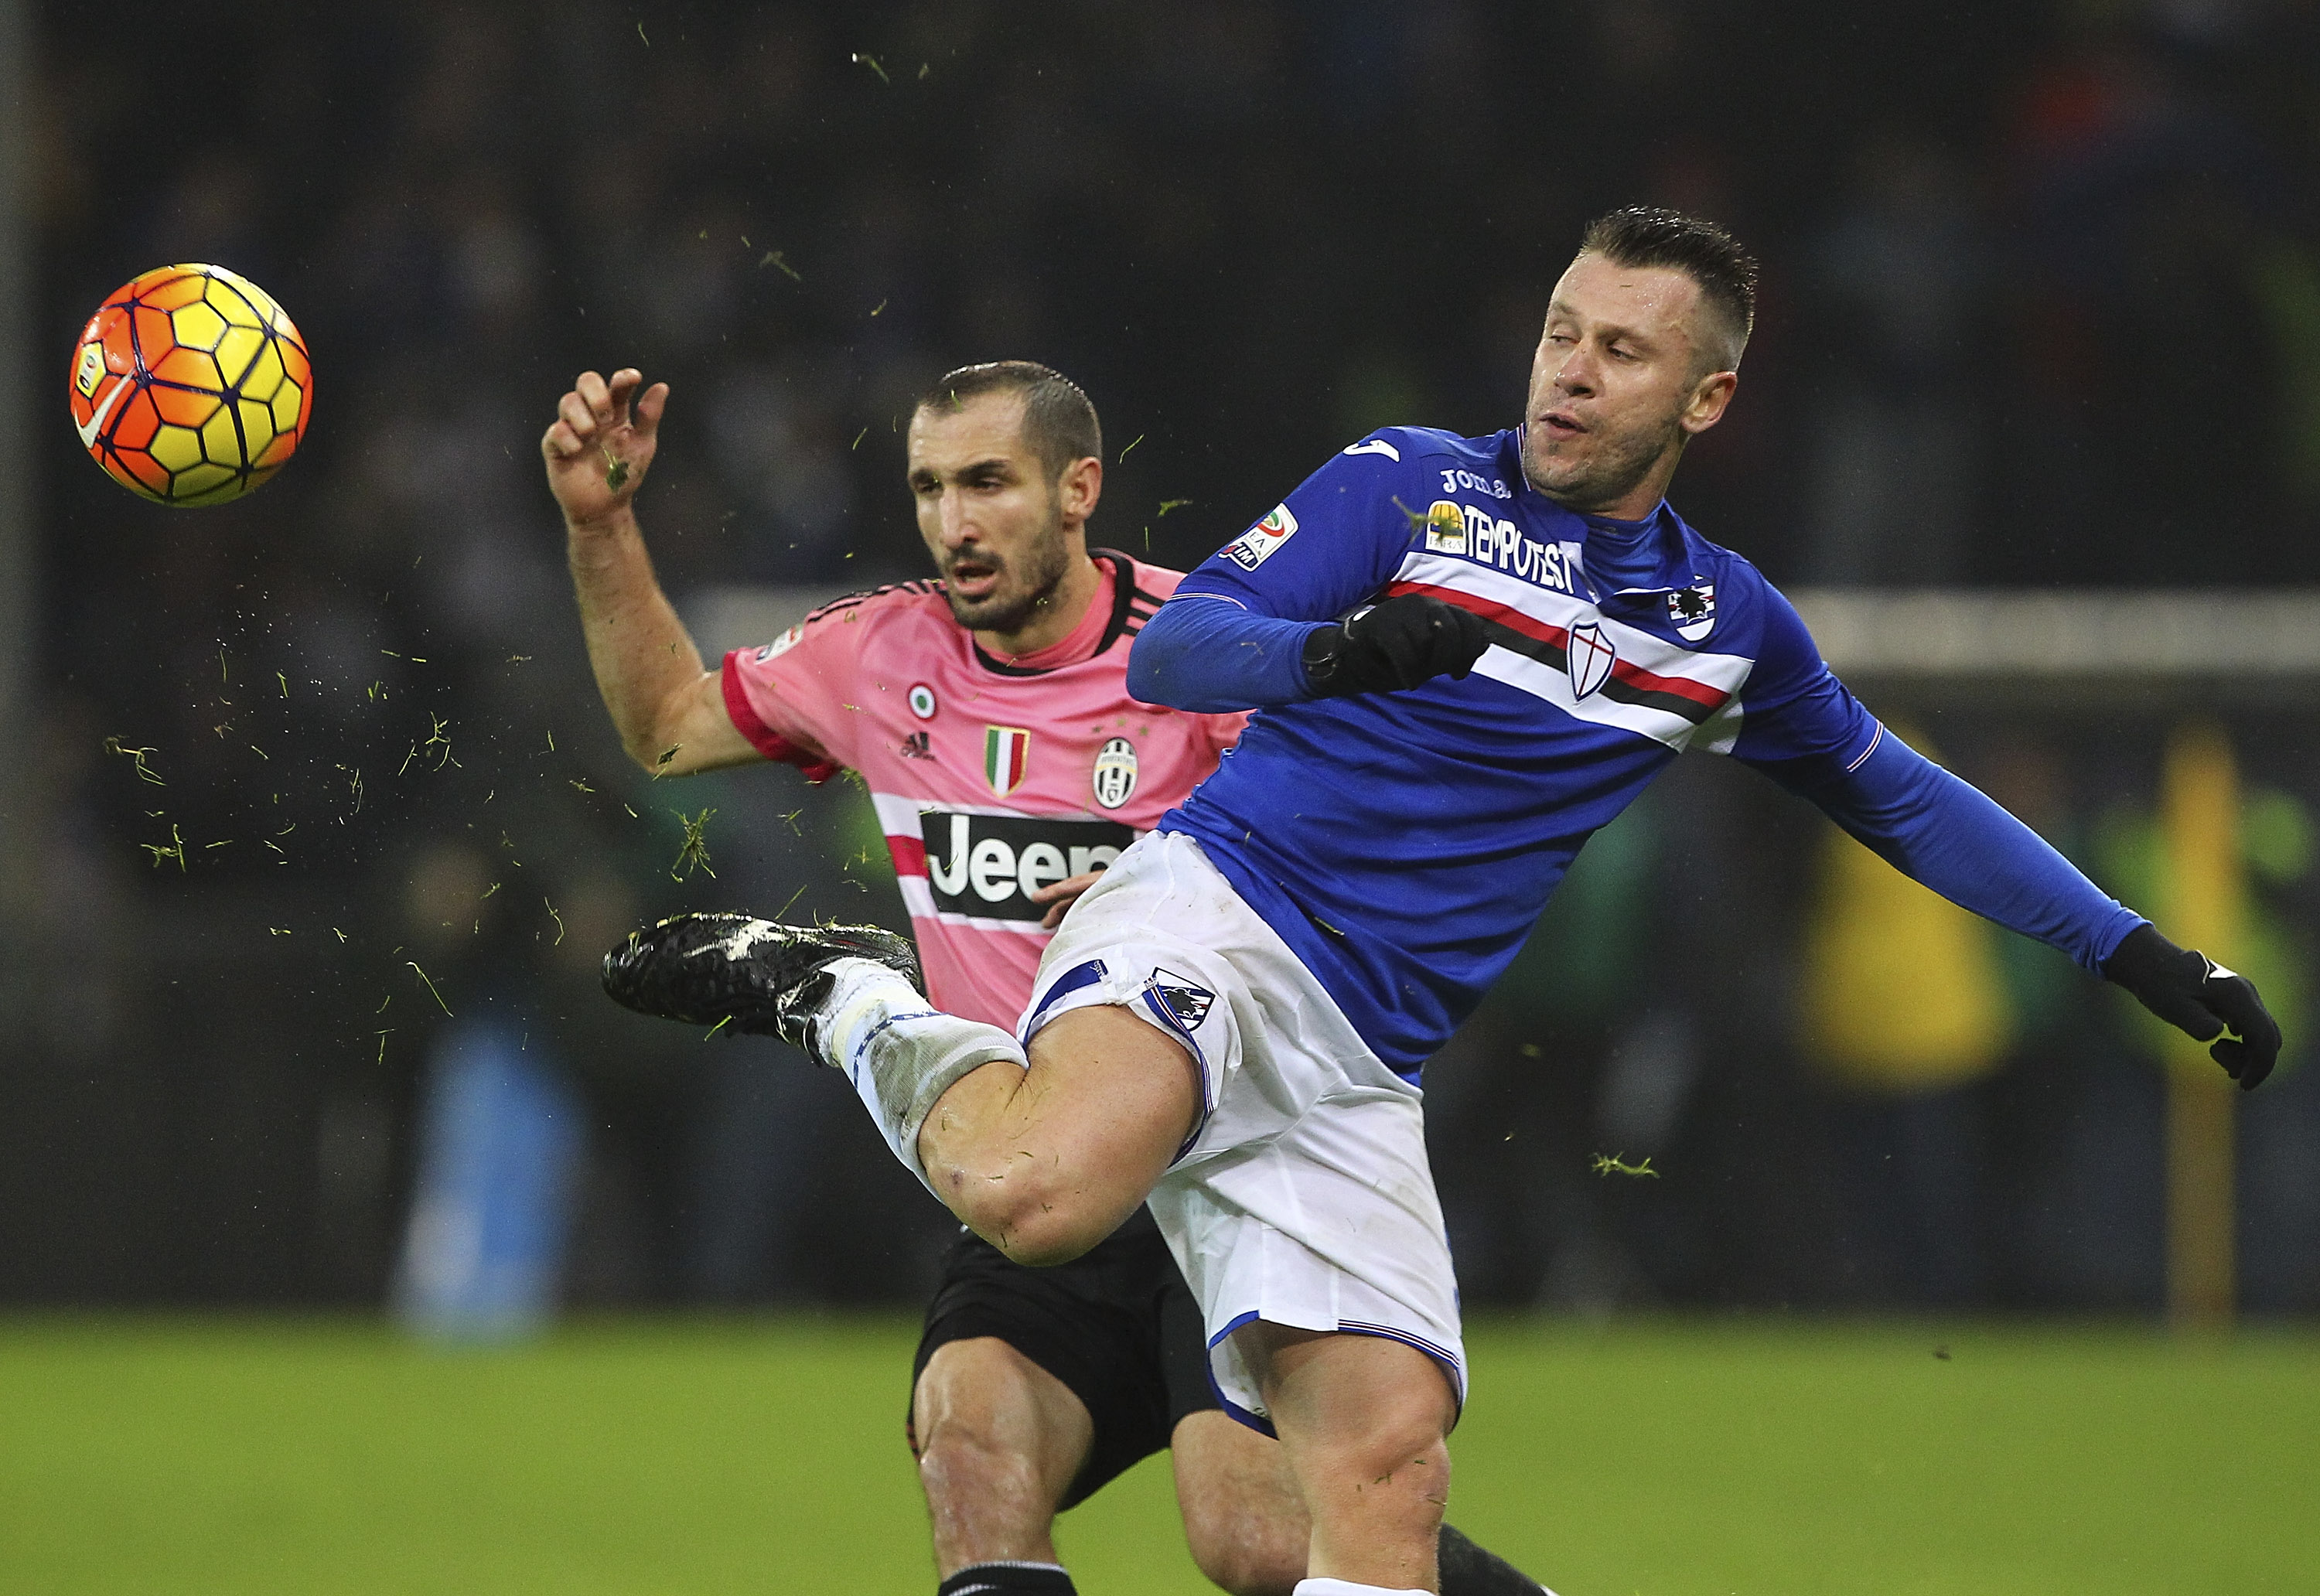  “They can’t play like that” – Cassano proclaims falling to sleep during Juventus-Fiorentina